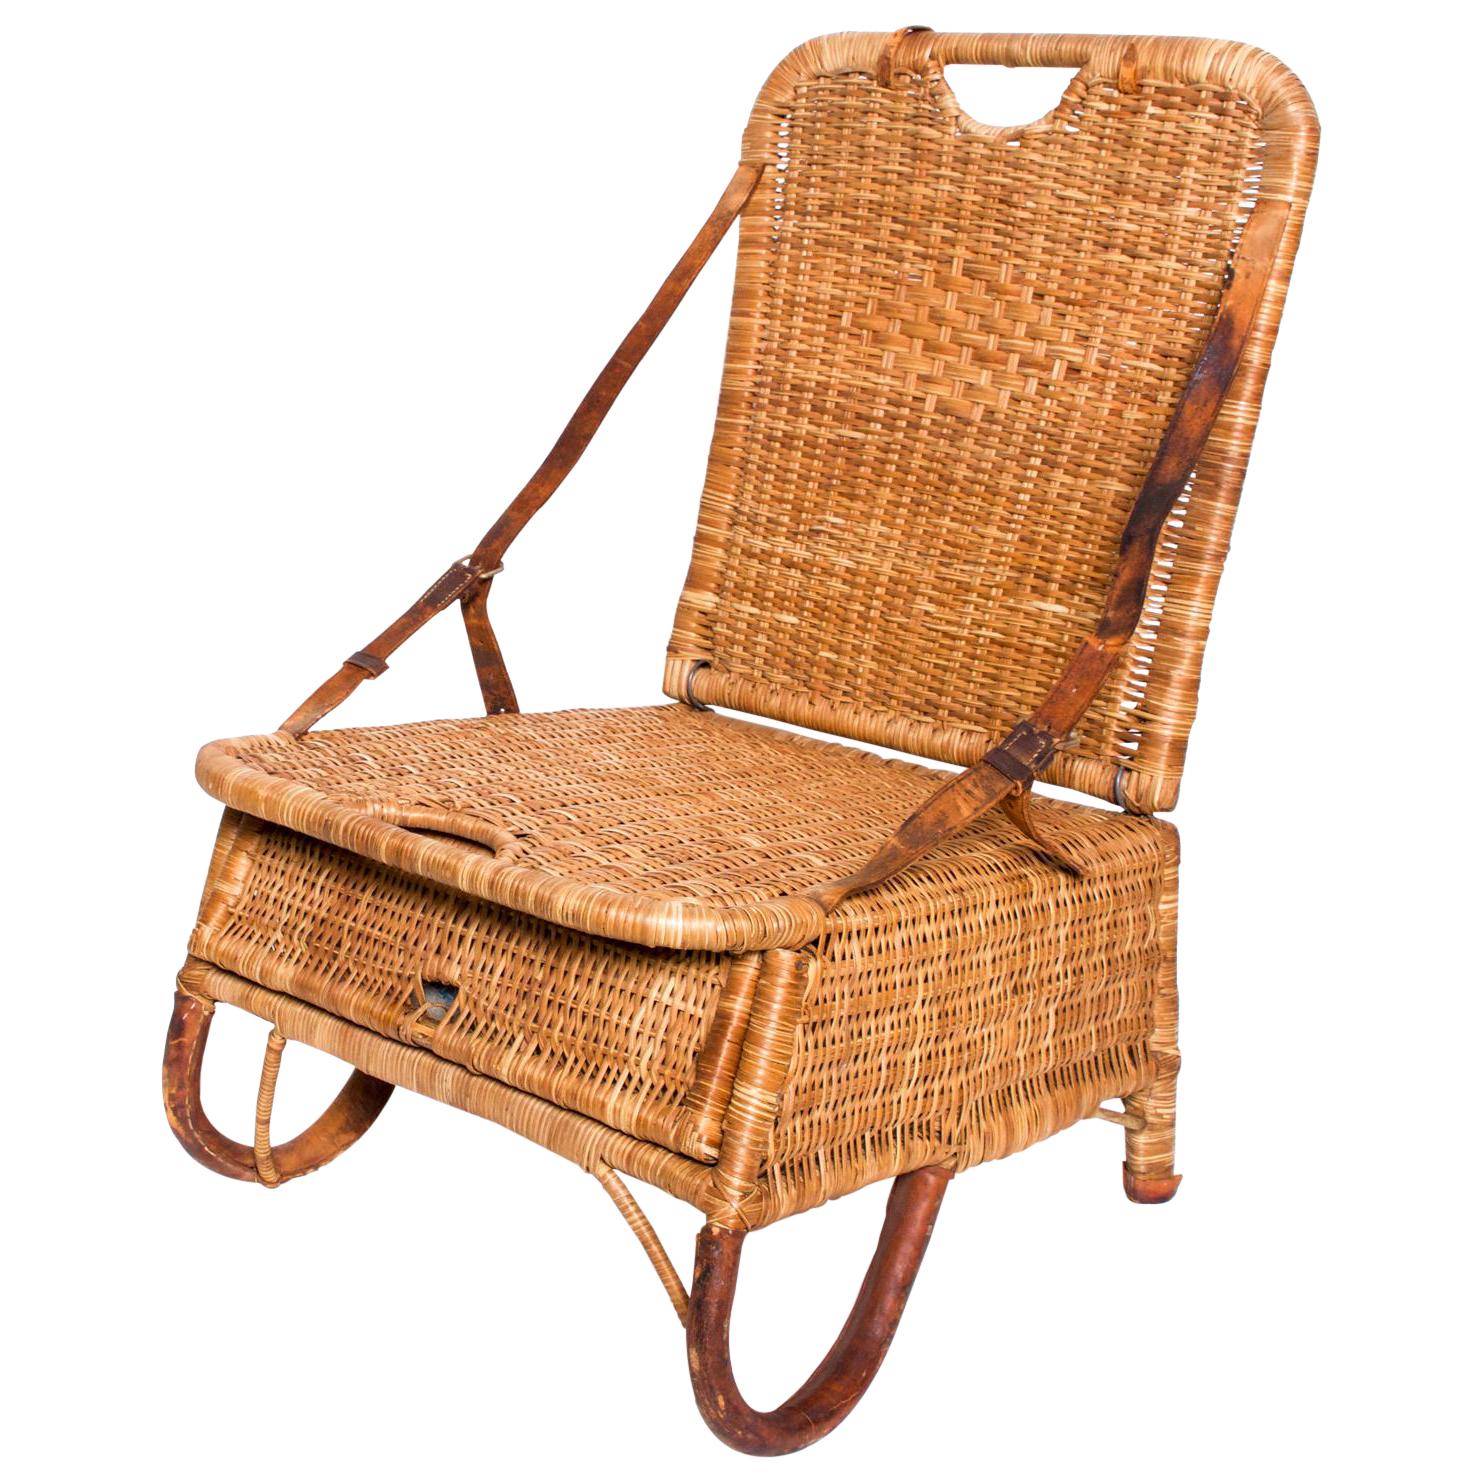 Vintage Folding Beach Chair Woven Wicker and Leather Sculpted Portable Travel